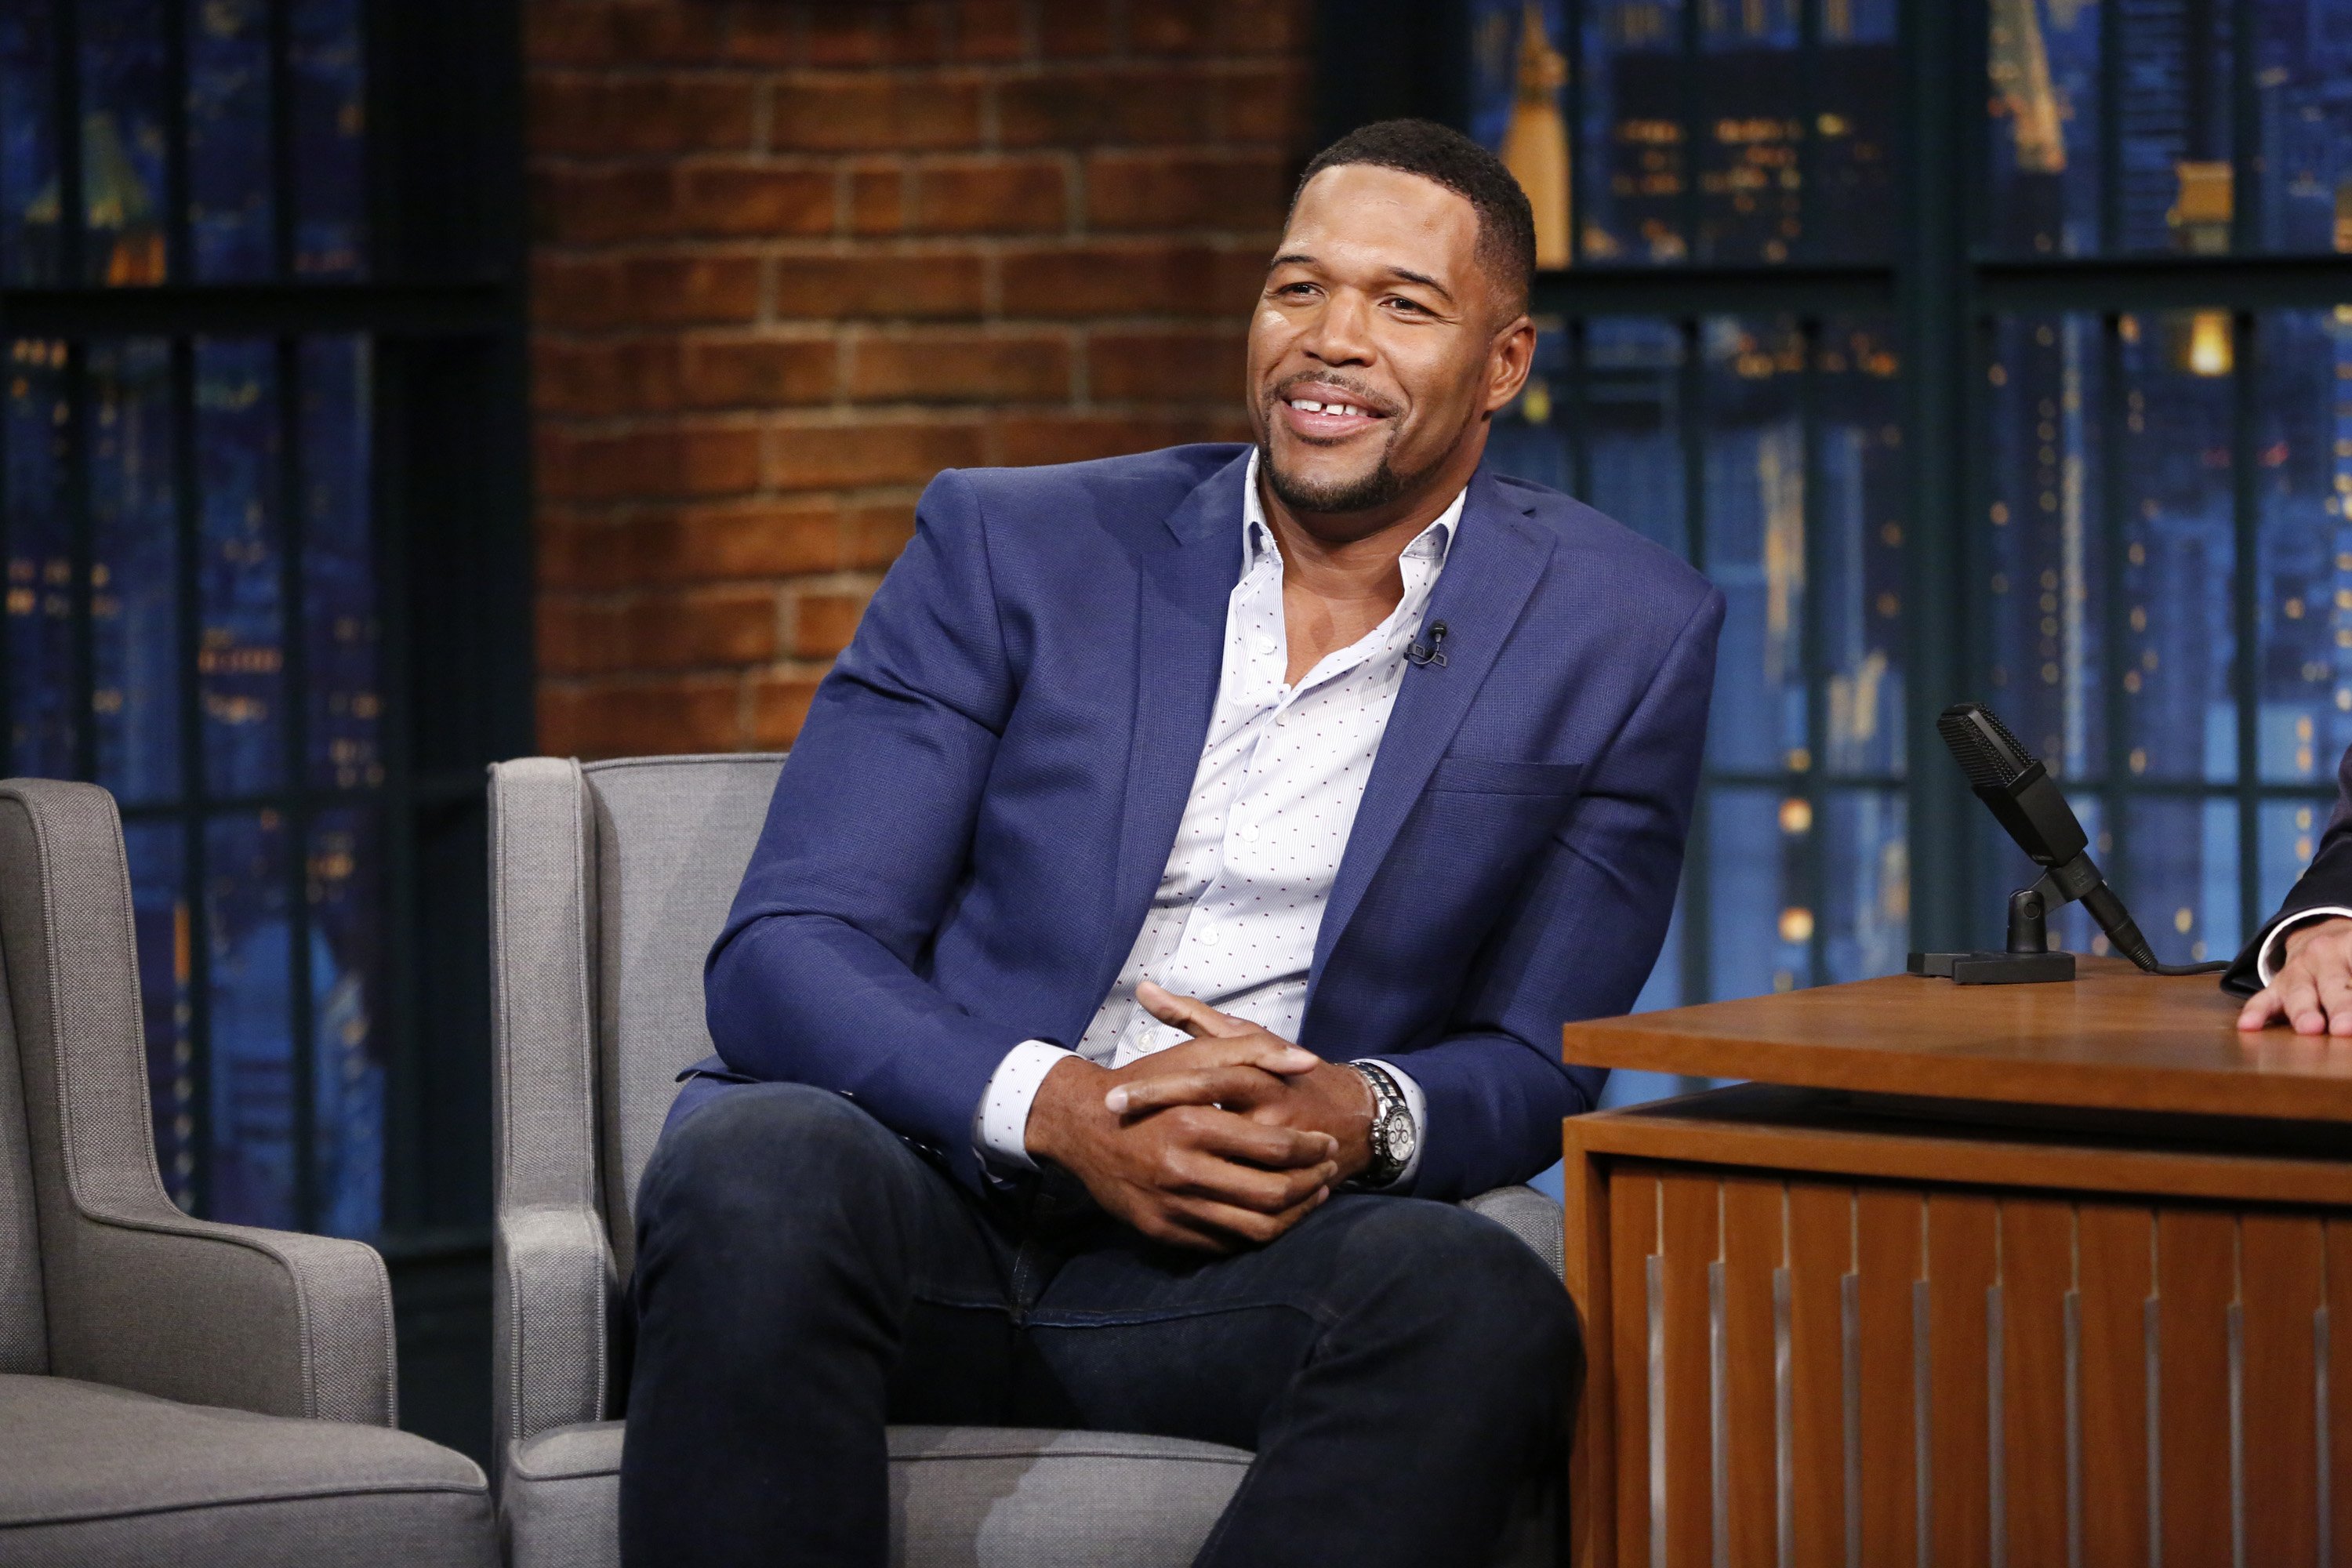 Michael Strahan during an interview on Late Night With Seth Meyers October 2, 2017 | Photo: Getty Images